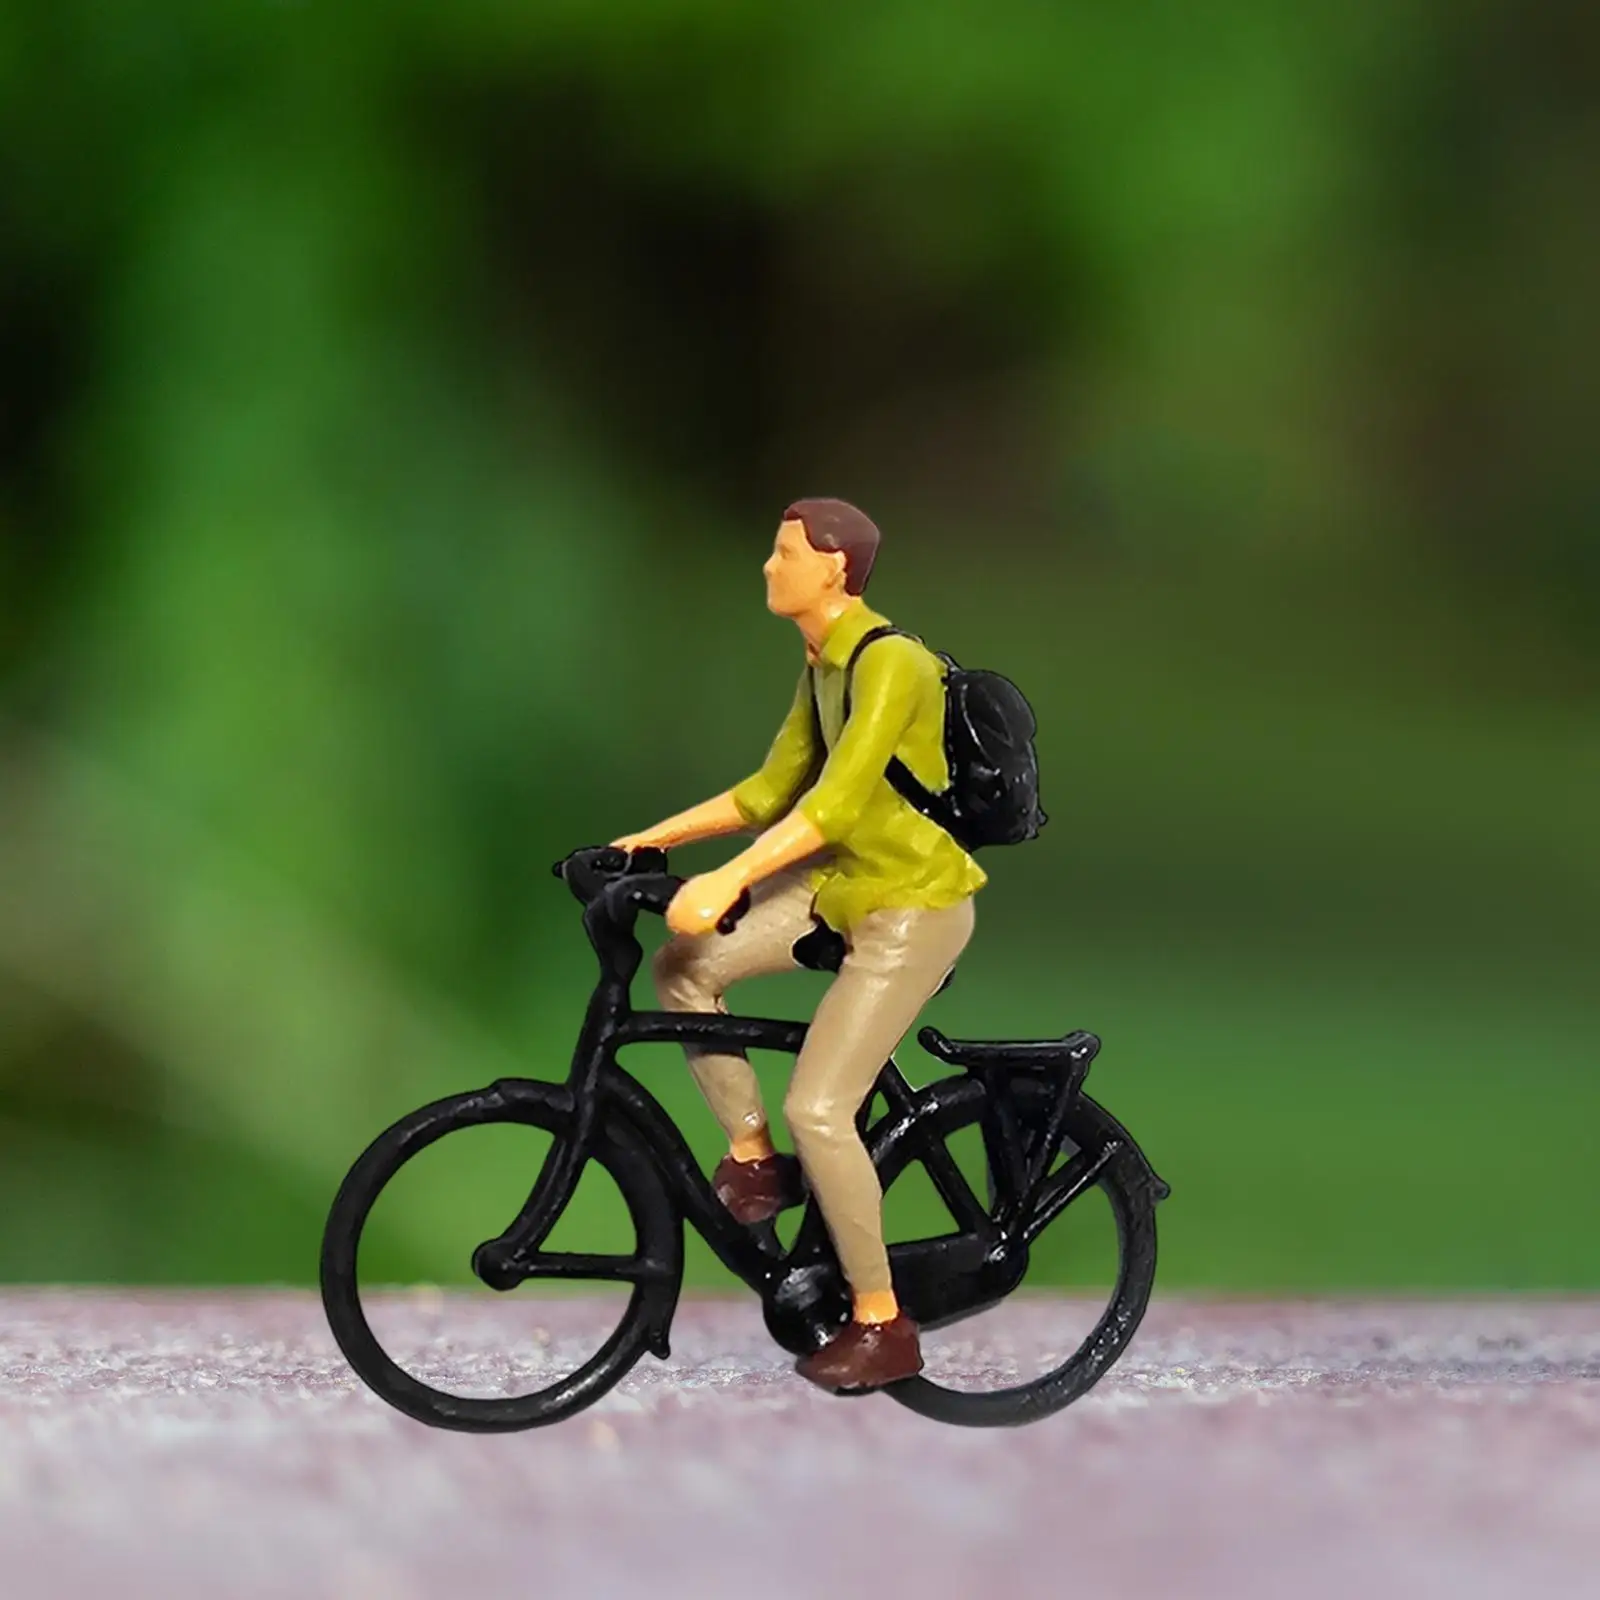 1/87 Scale Cyclist Figurine Tiny People Mini People Model Ornament for Cycling Scene DIY Projects Diorama Sand Table Layout